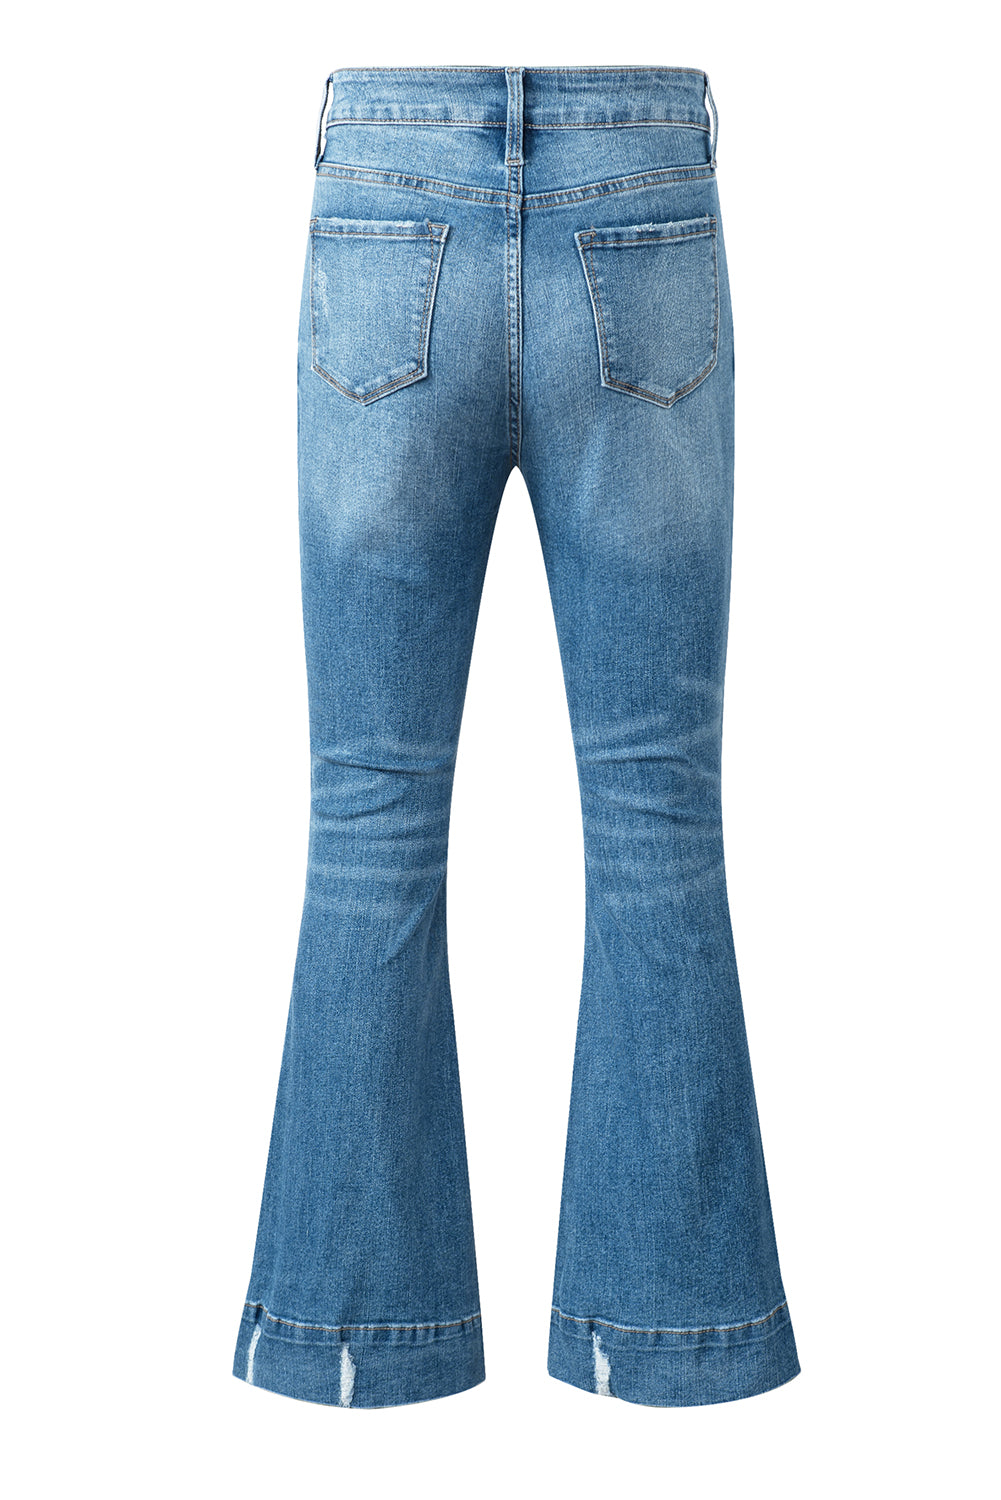 Cat's Whisker Bootcut Jeans with Pockets Bottom wear